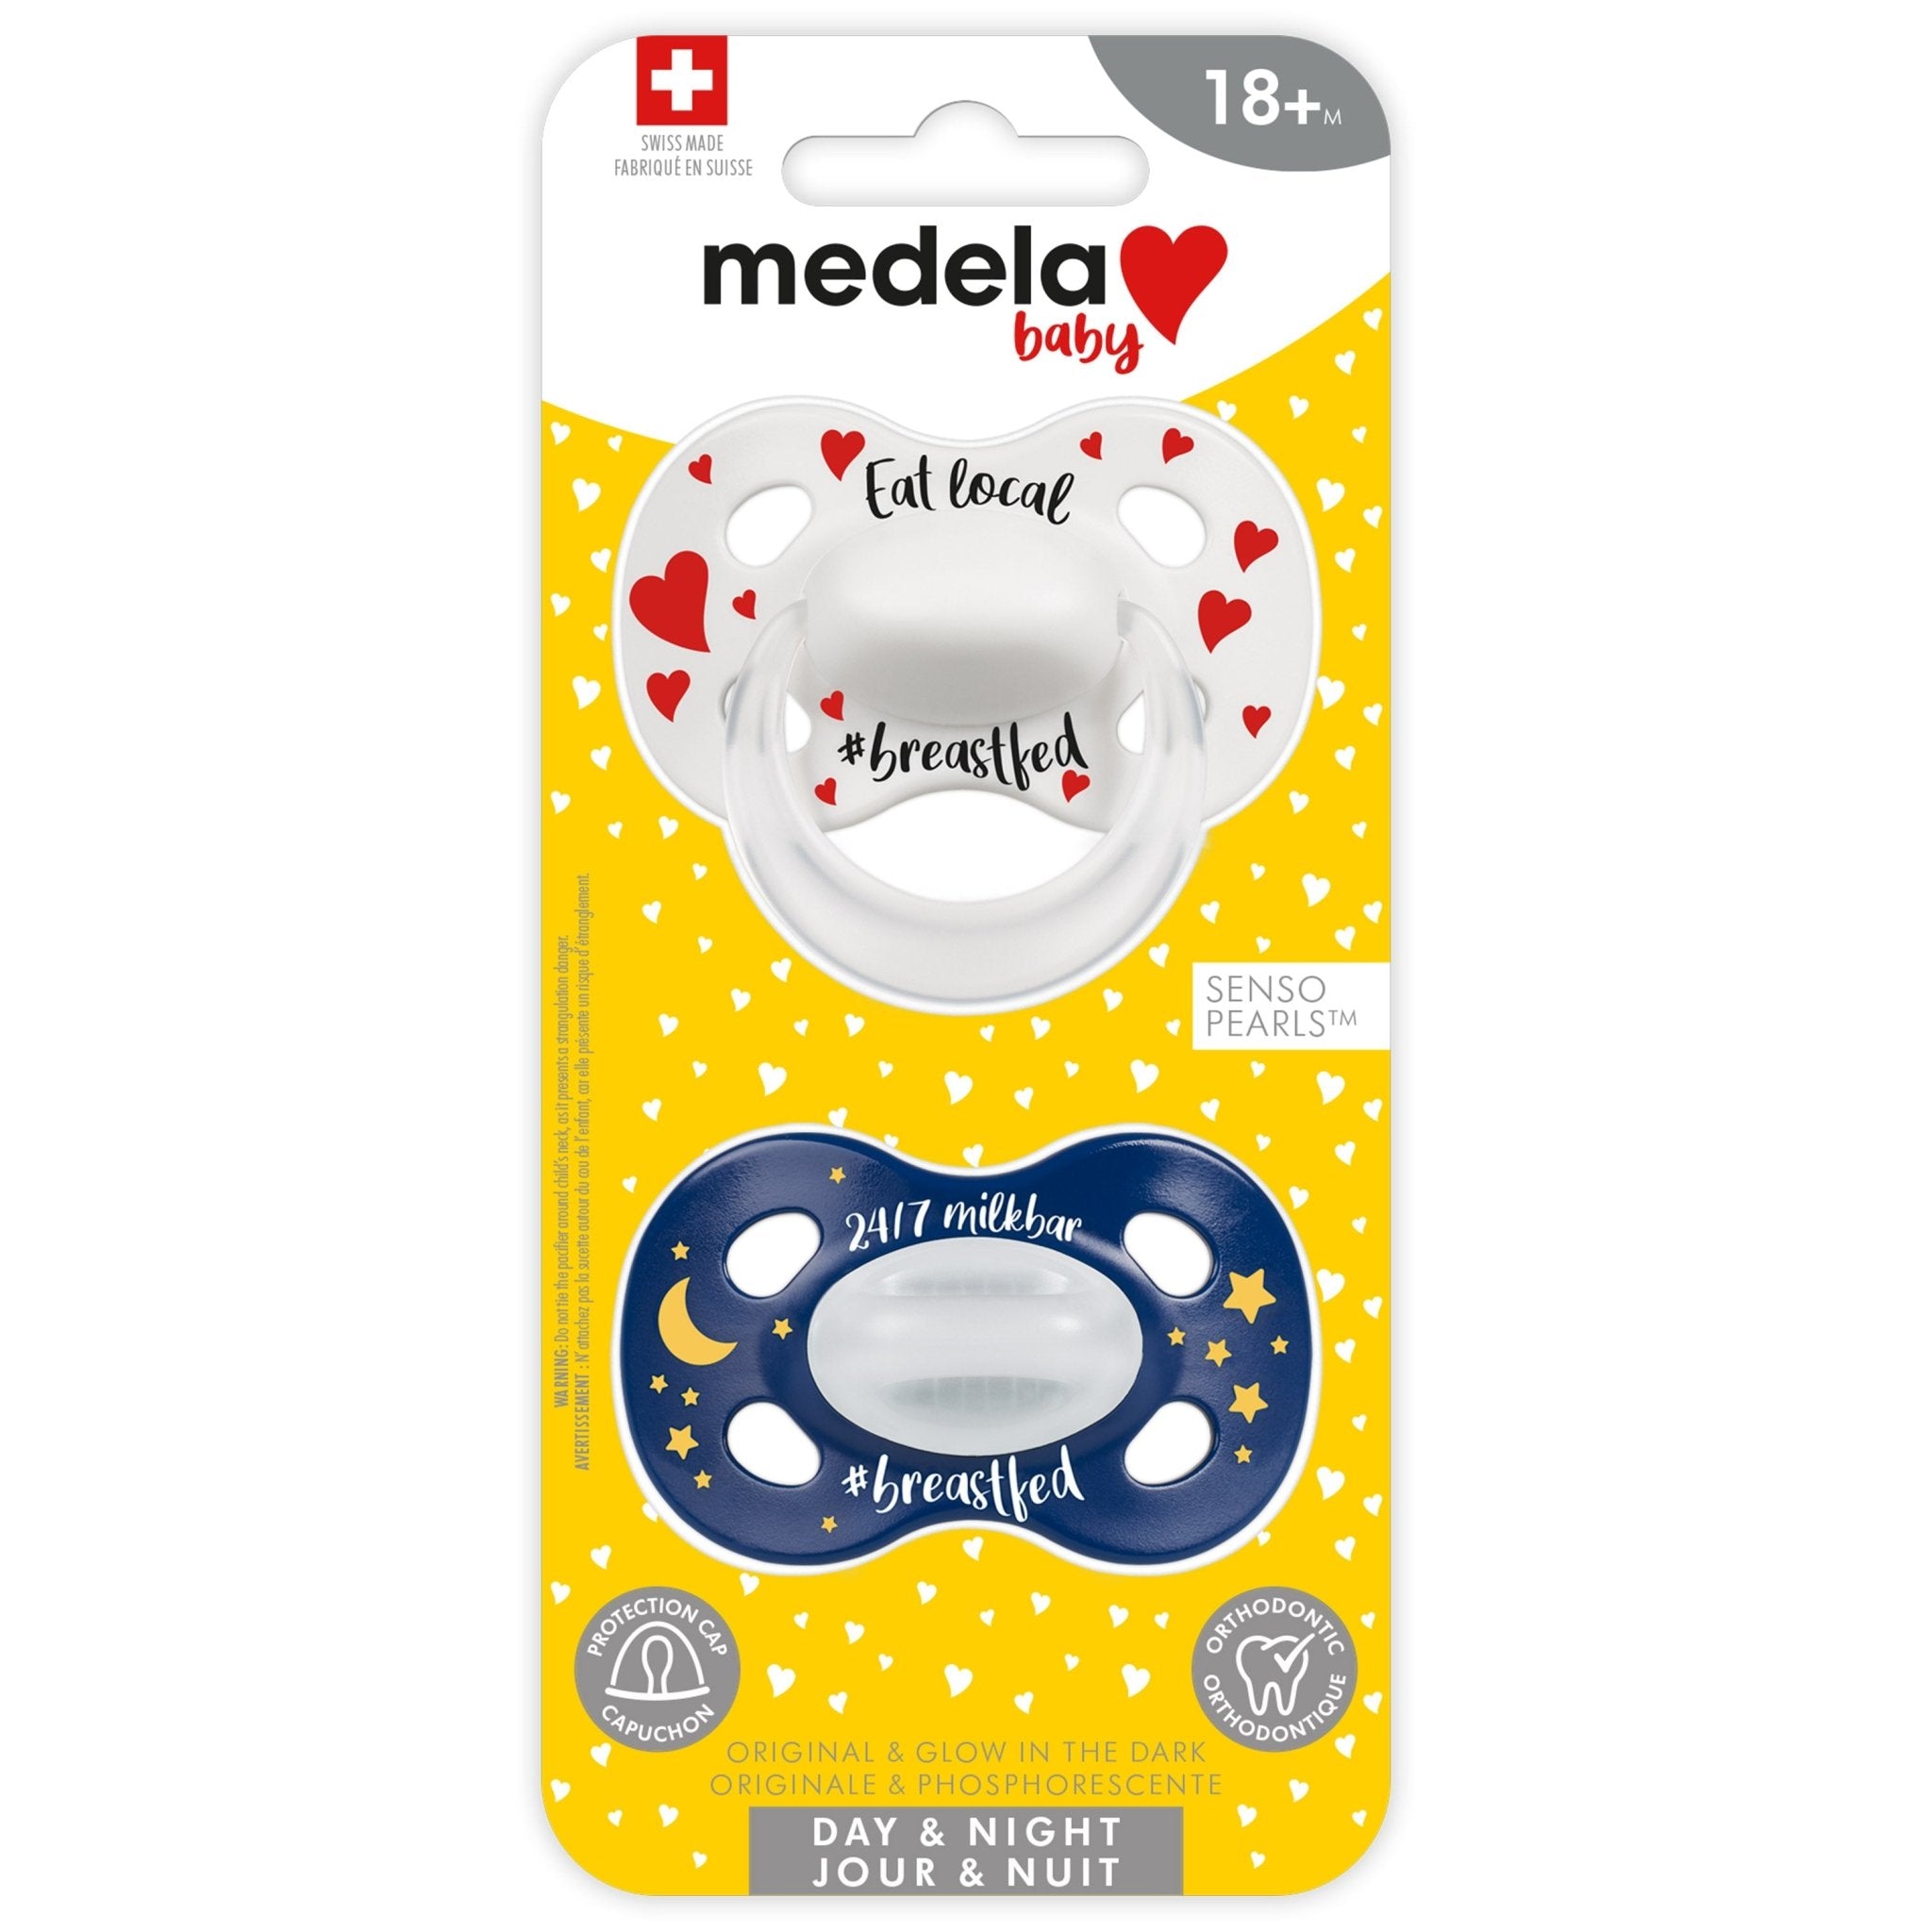 Medela Baby Day & Night Pacifier, Eat Local Design, 2 Pack - ANB Baby -0-18 months pacifiers